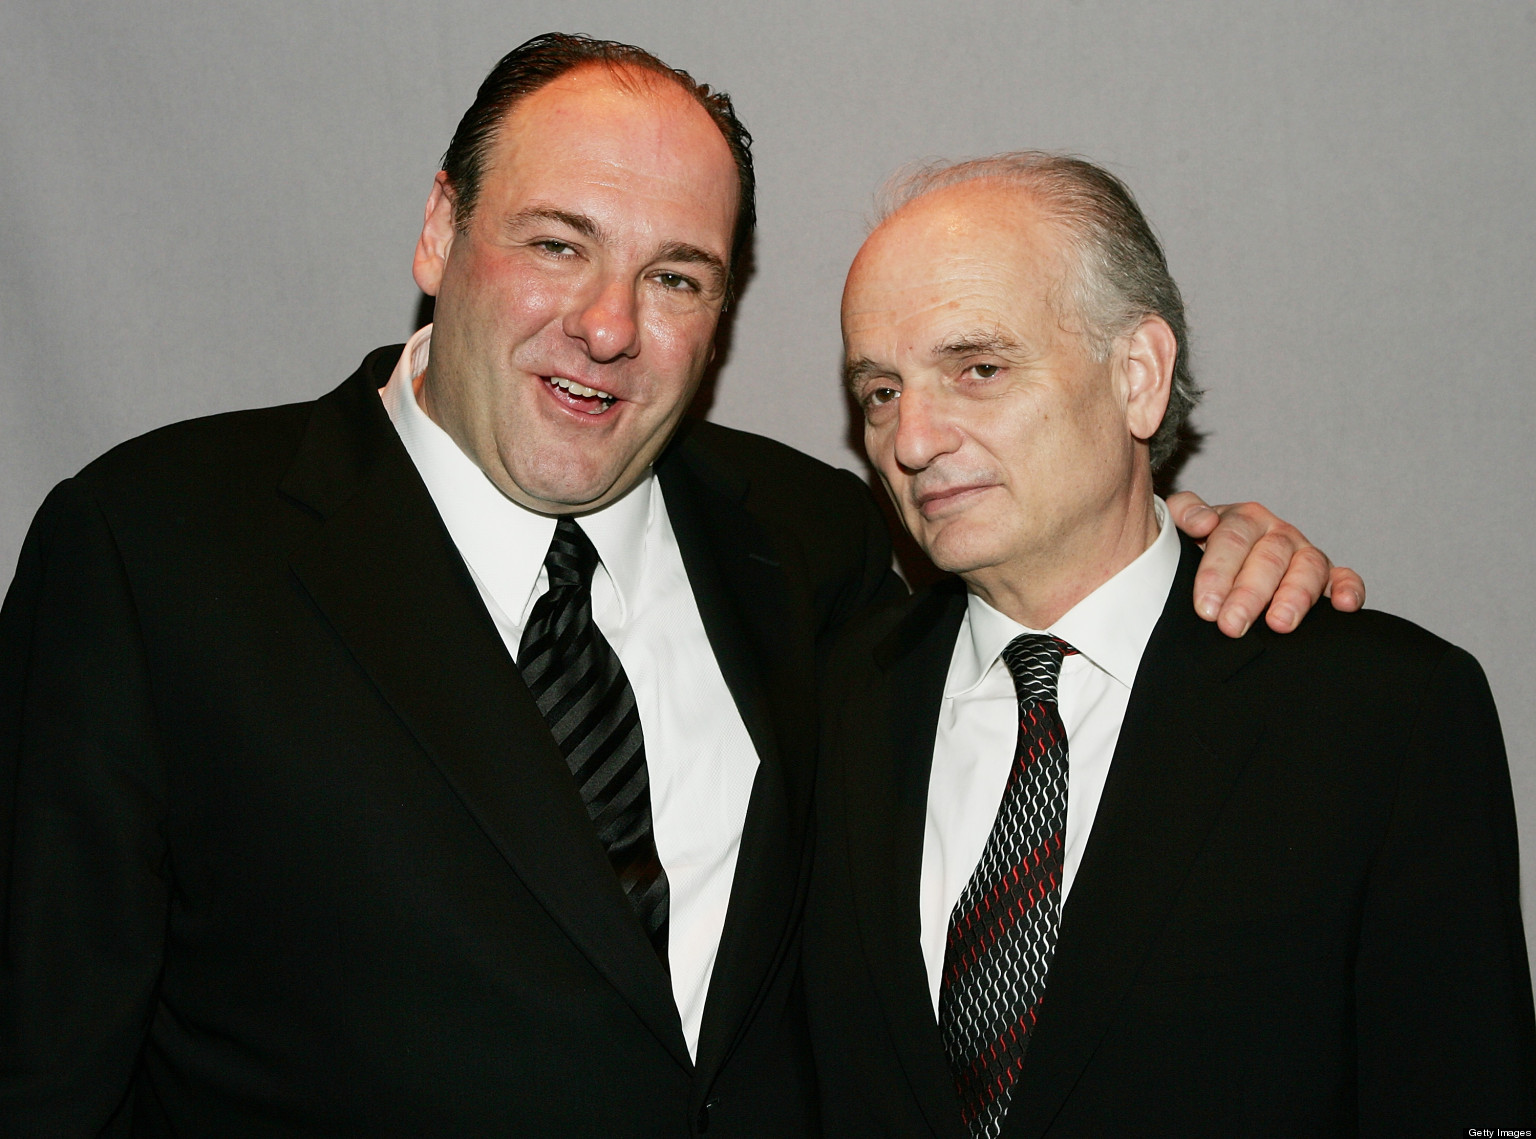 HBO Premiere Of "The Sopranos" - After Party